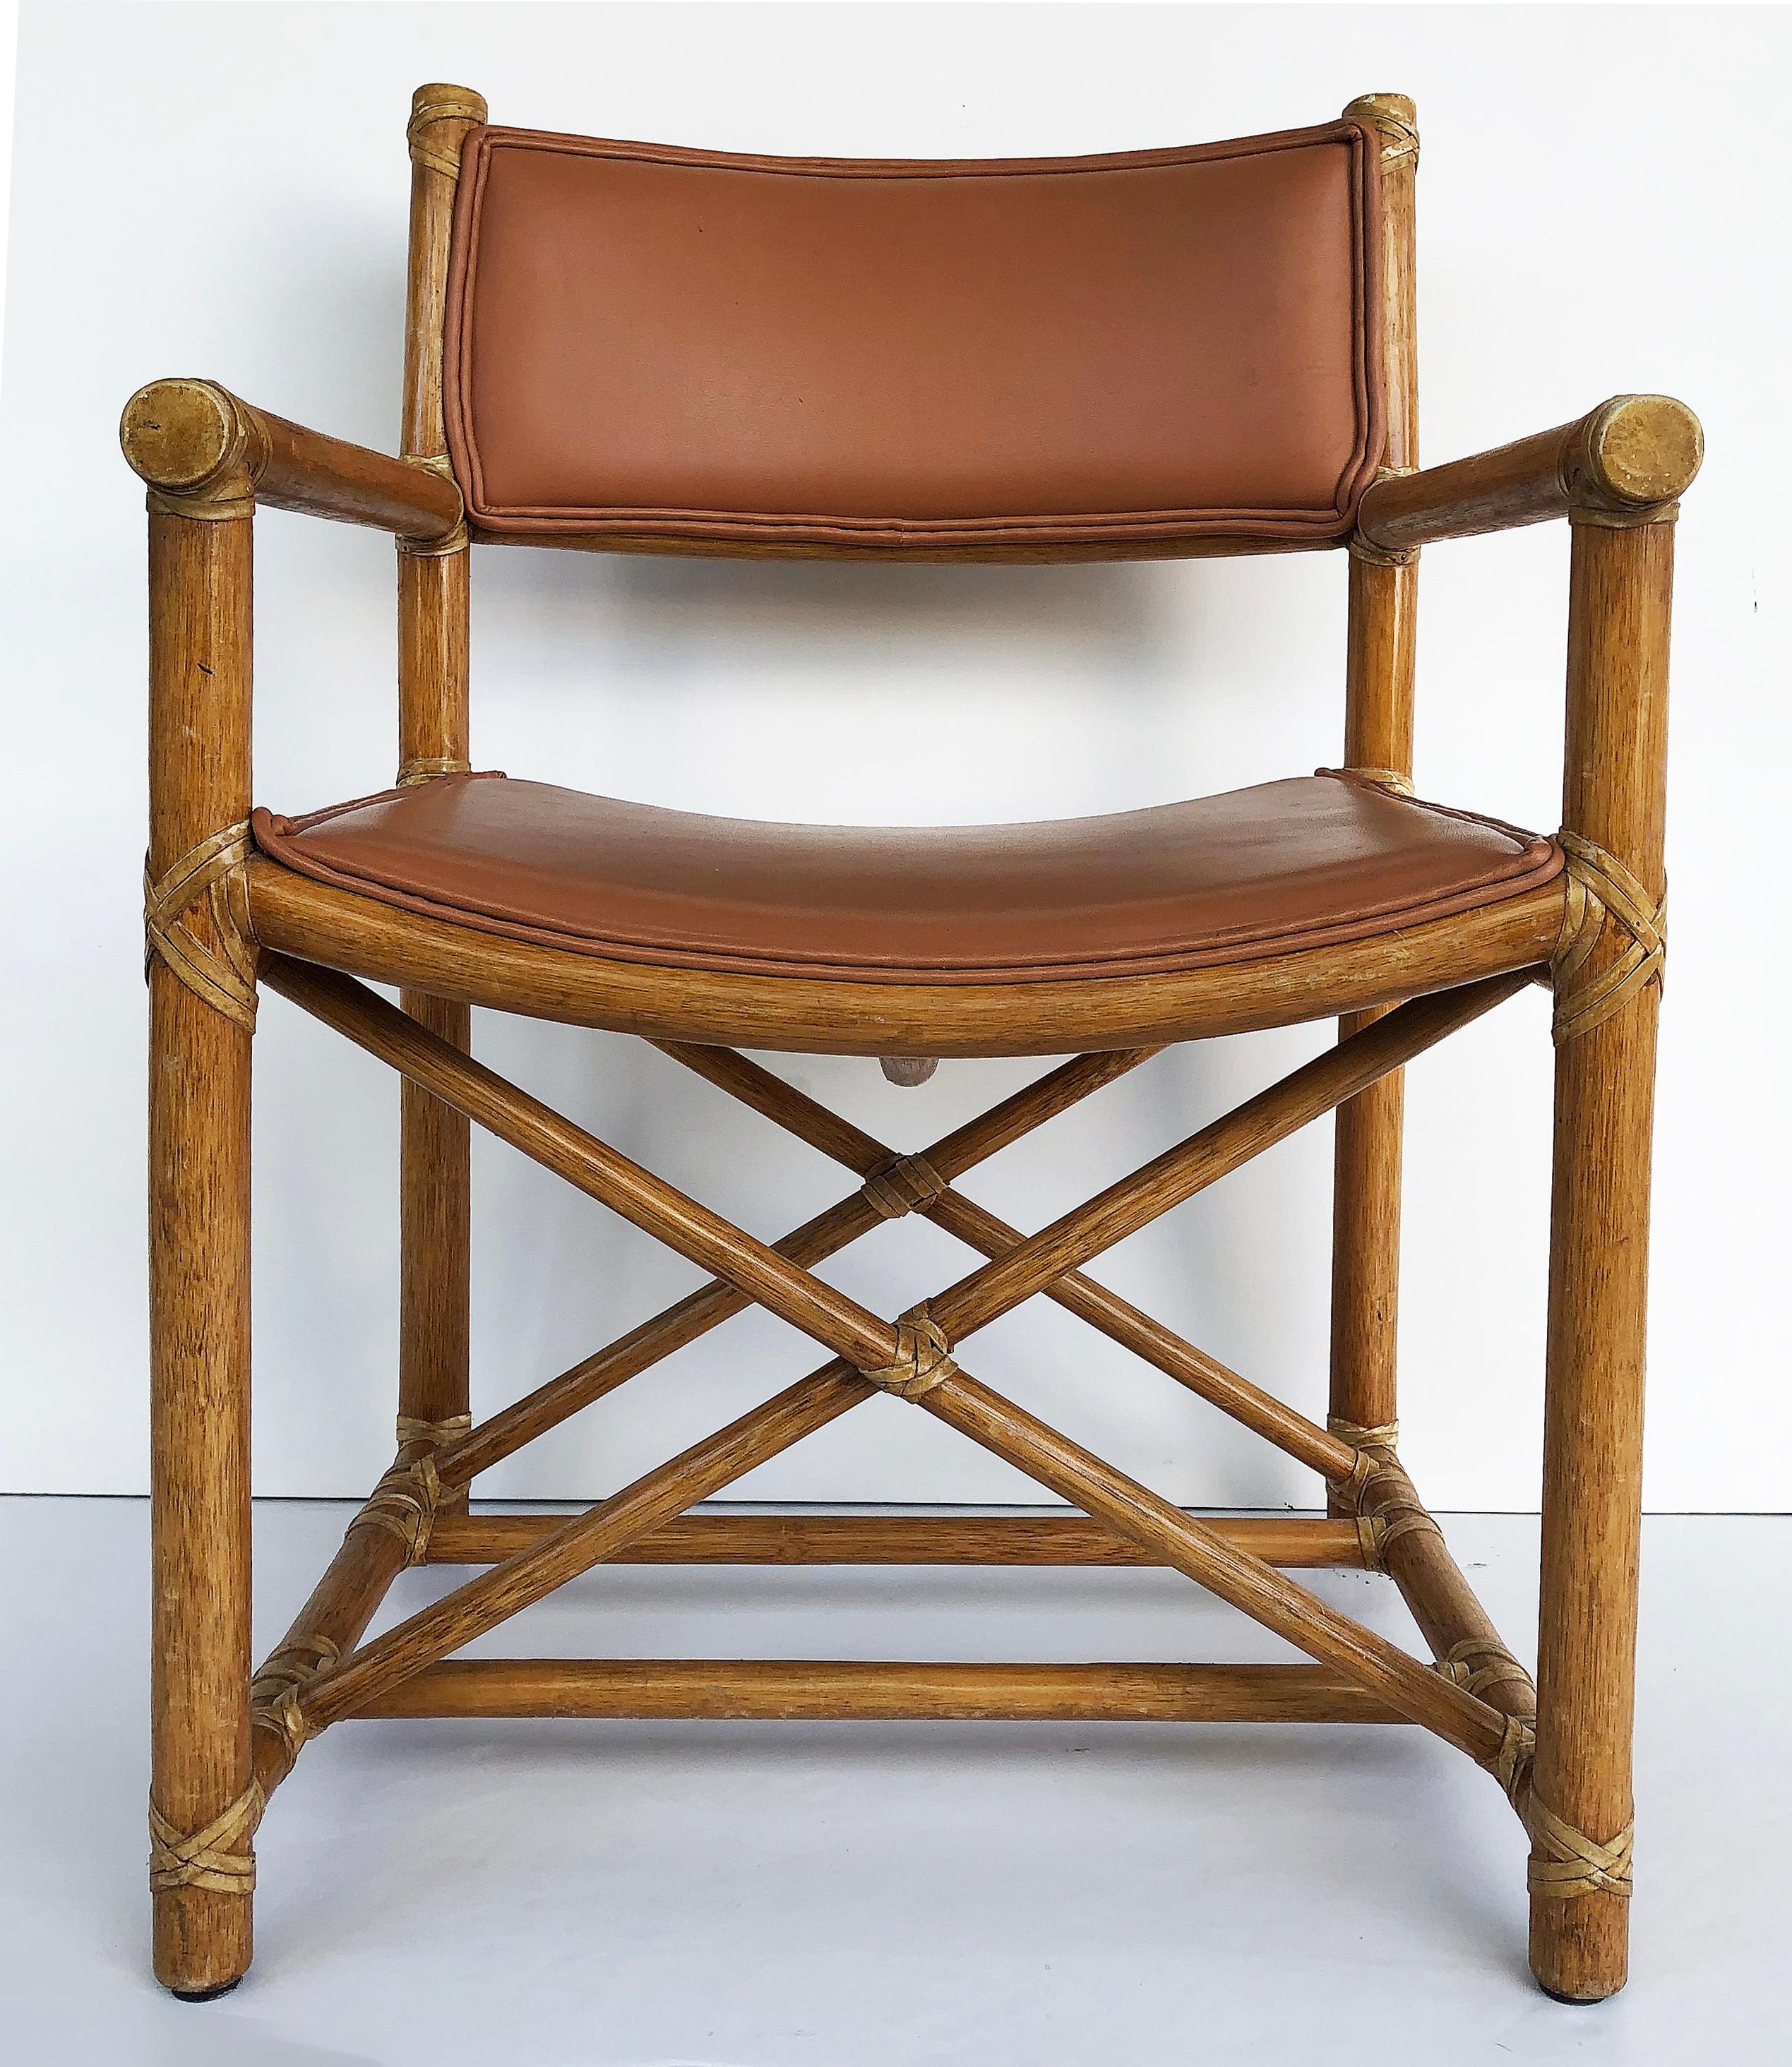 McGuire San Francisco Campaign dining chairs with caned backs, set of six

Offered for sale is a set of six McGuire San Francisco Campaign style dining armchairs with caned backs, X-framed cross stretchers and the signature McGuire leather